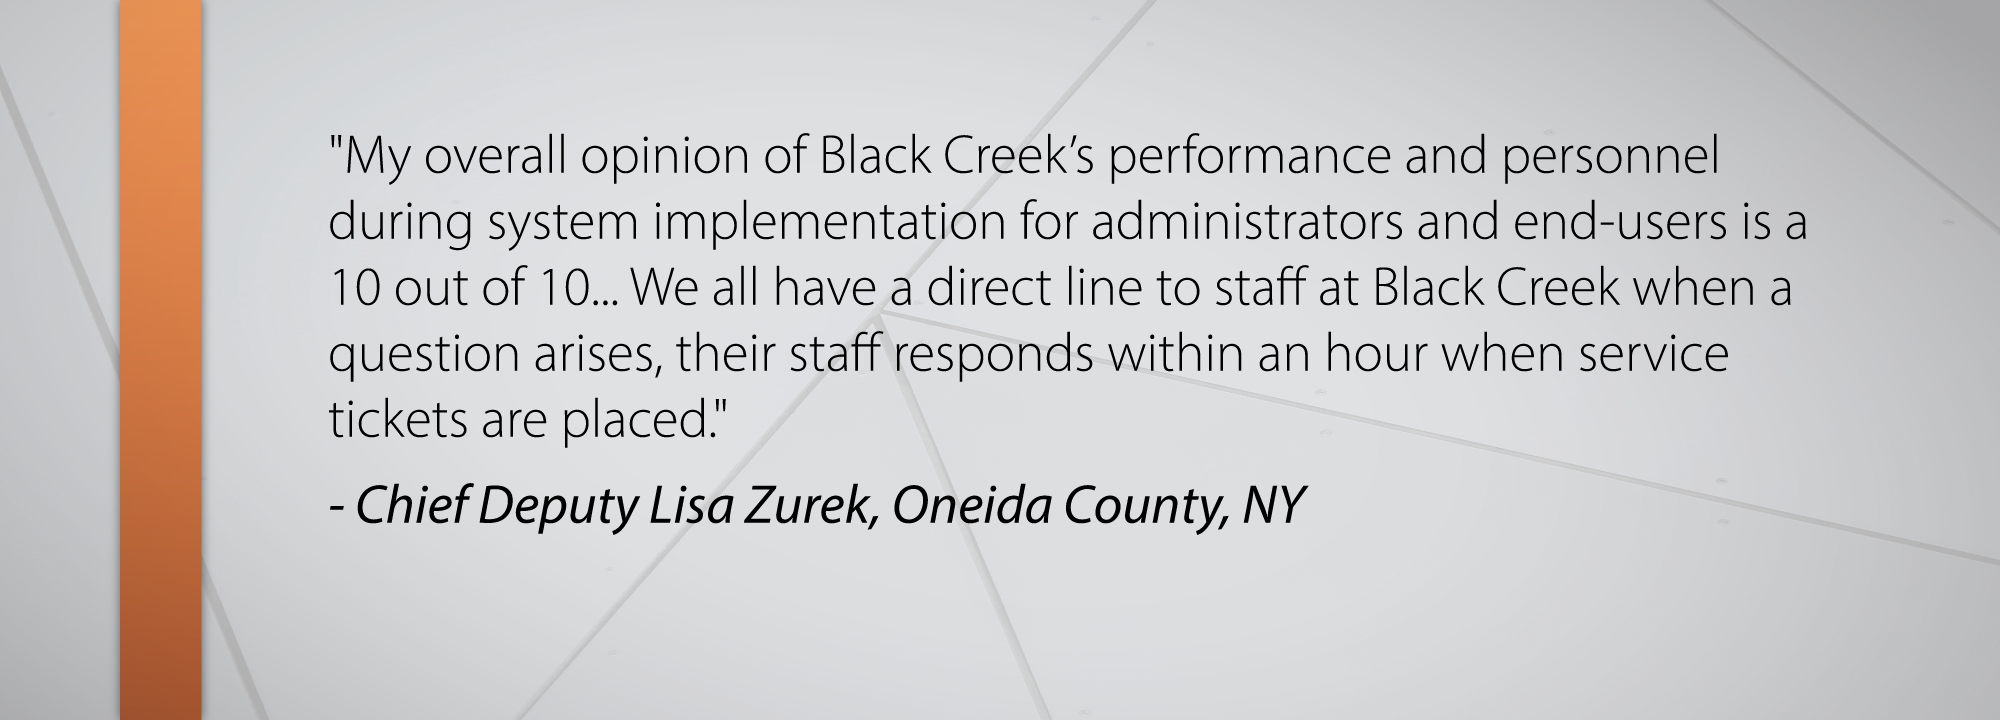 My overall opinion of Black Creek’s performance and personnel during system implementation for administrators and end-users is a 10 out of 10... We all have a direct line to staff at Black Creek when a question arises, their staff responds within an hour when service tickets are placed. - Chief Deputy Lisa Zurek, Oneida County, NY